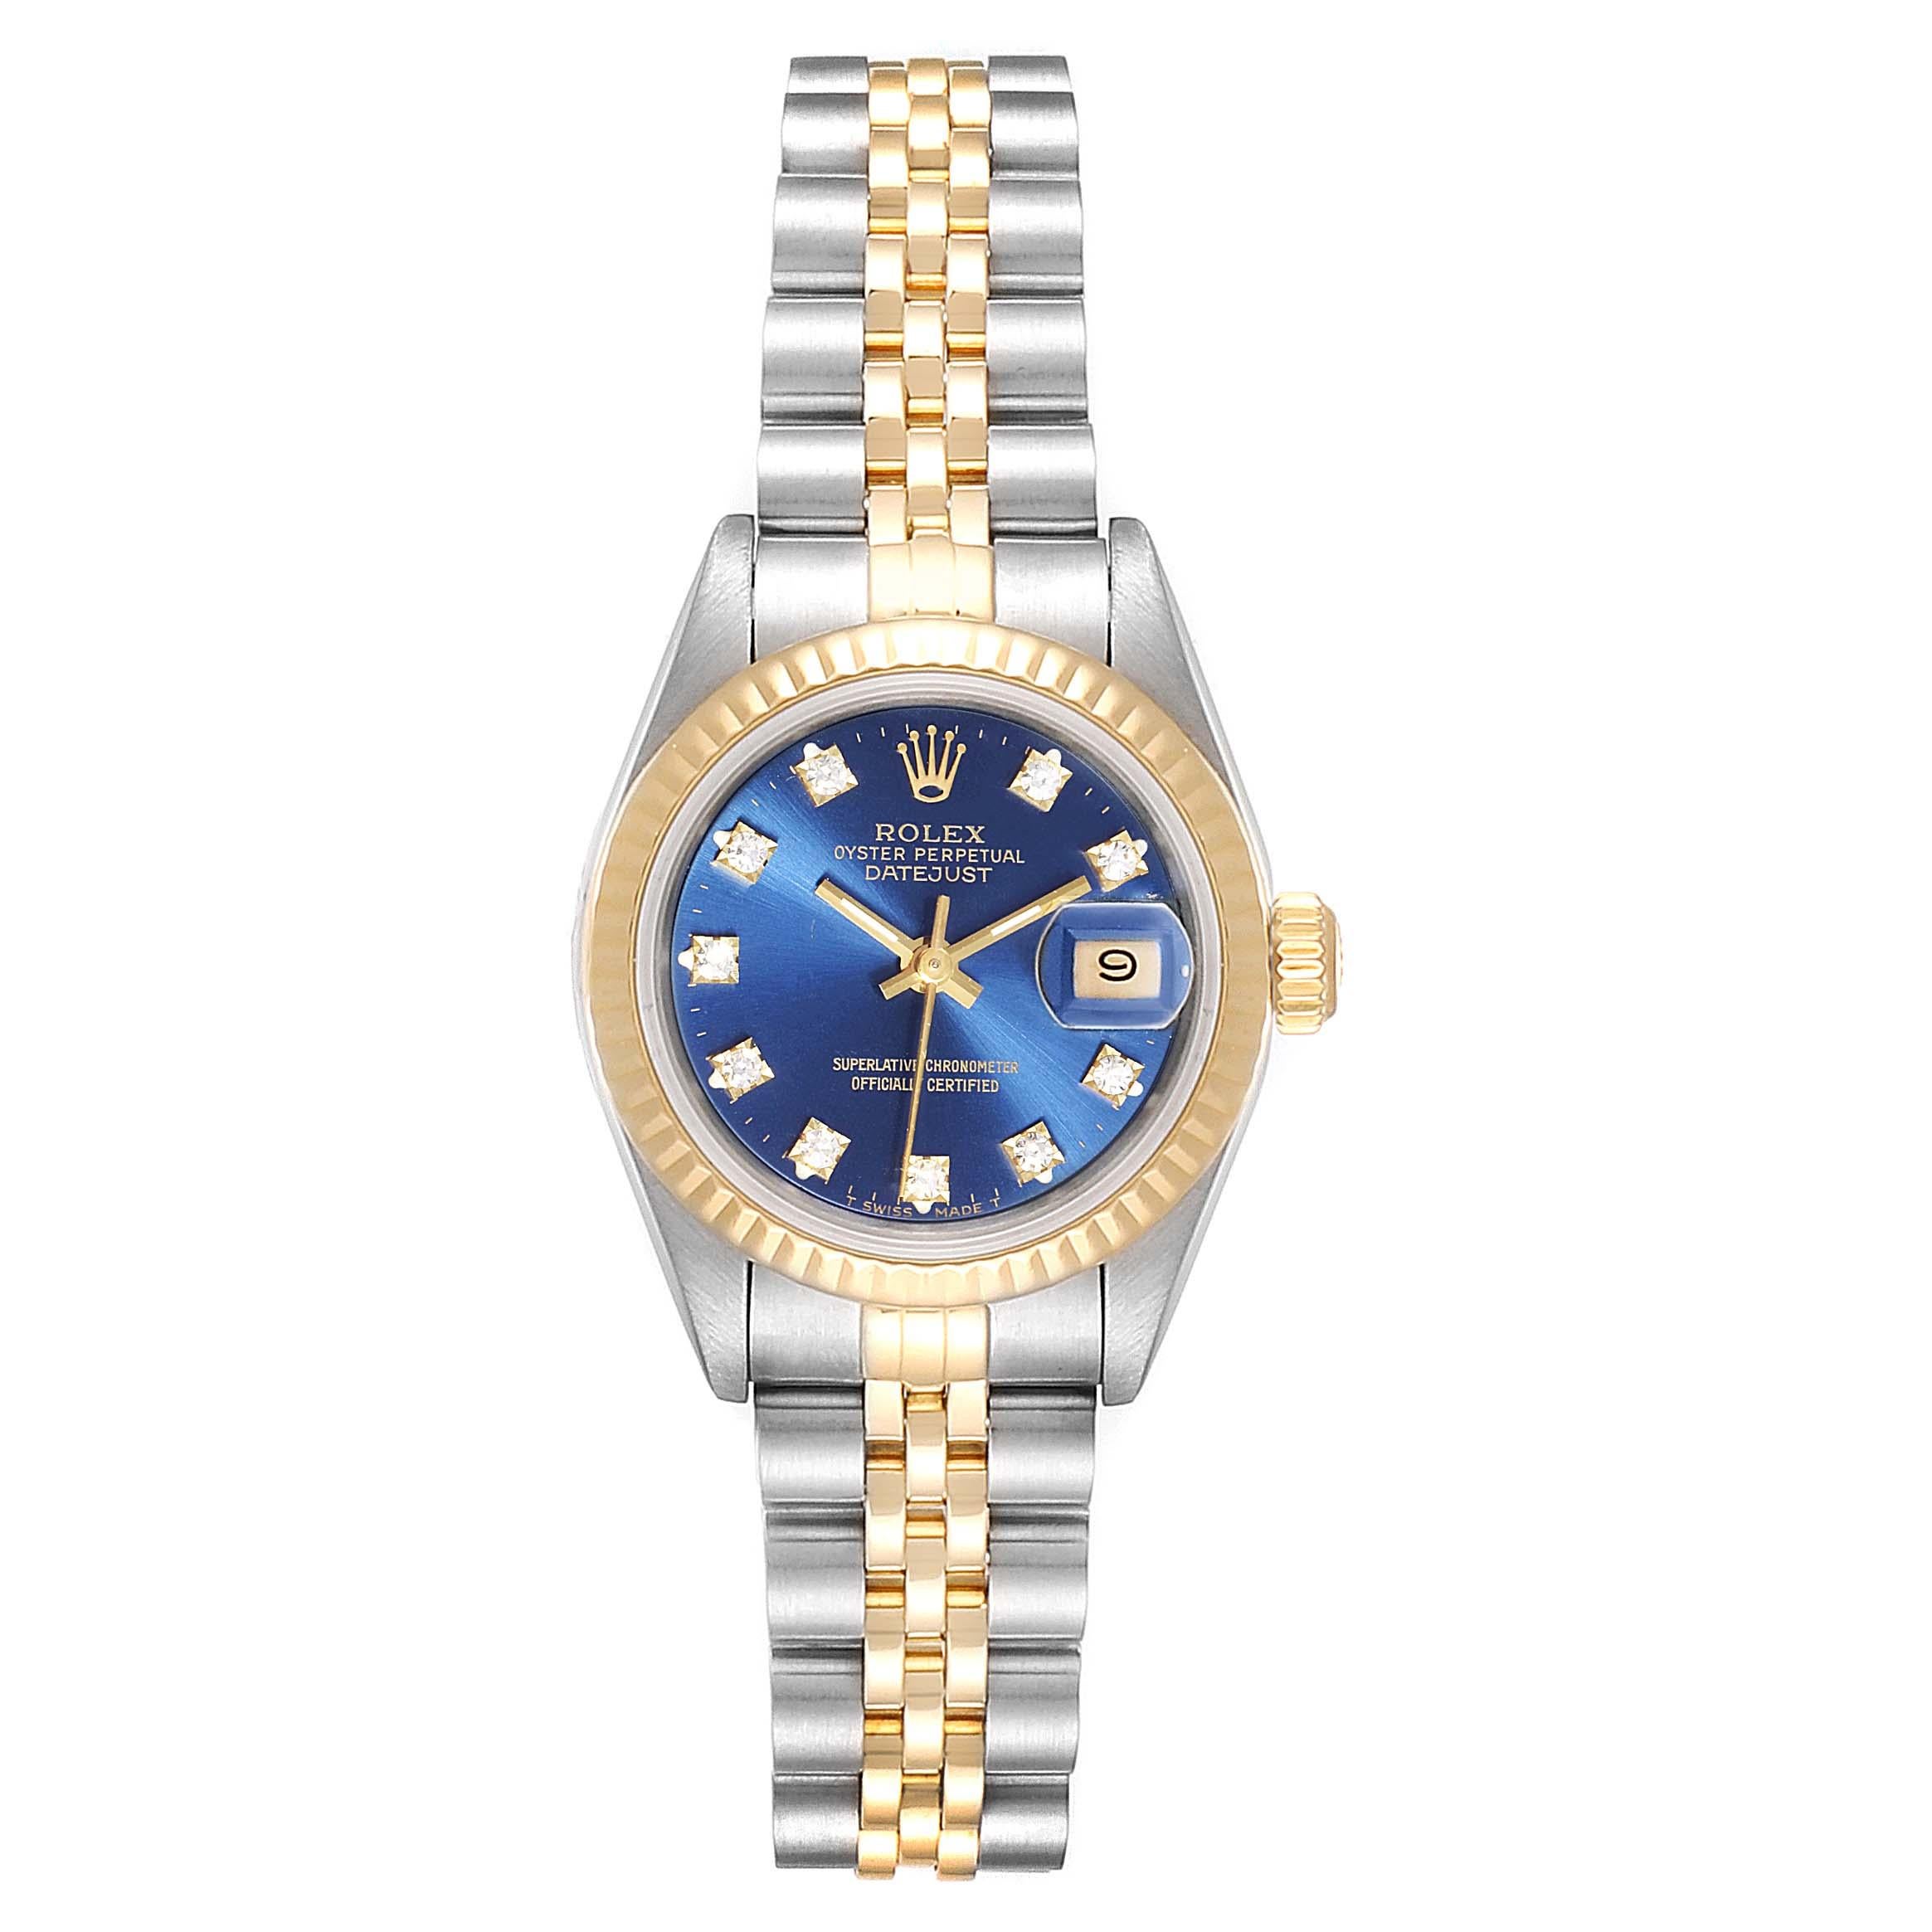 Rolex Datejust 26mm Steel Yellow Gold Diamond Dial Ladies Watch 69173. Officially certified chronometer self-winding movement. Stainless steel oyster case 26.0 mm in diameter. Rolex logo on a crown. 18k yellow gold fluted bezel. Scratch resistant